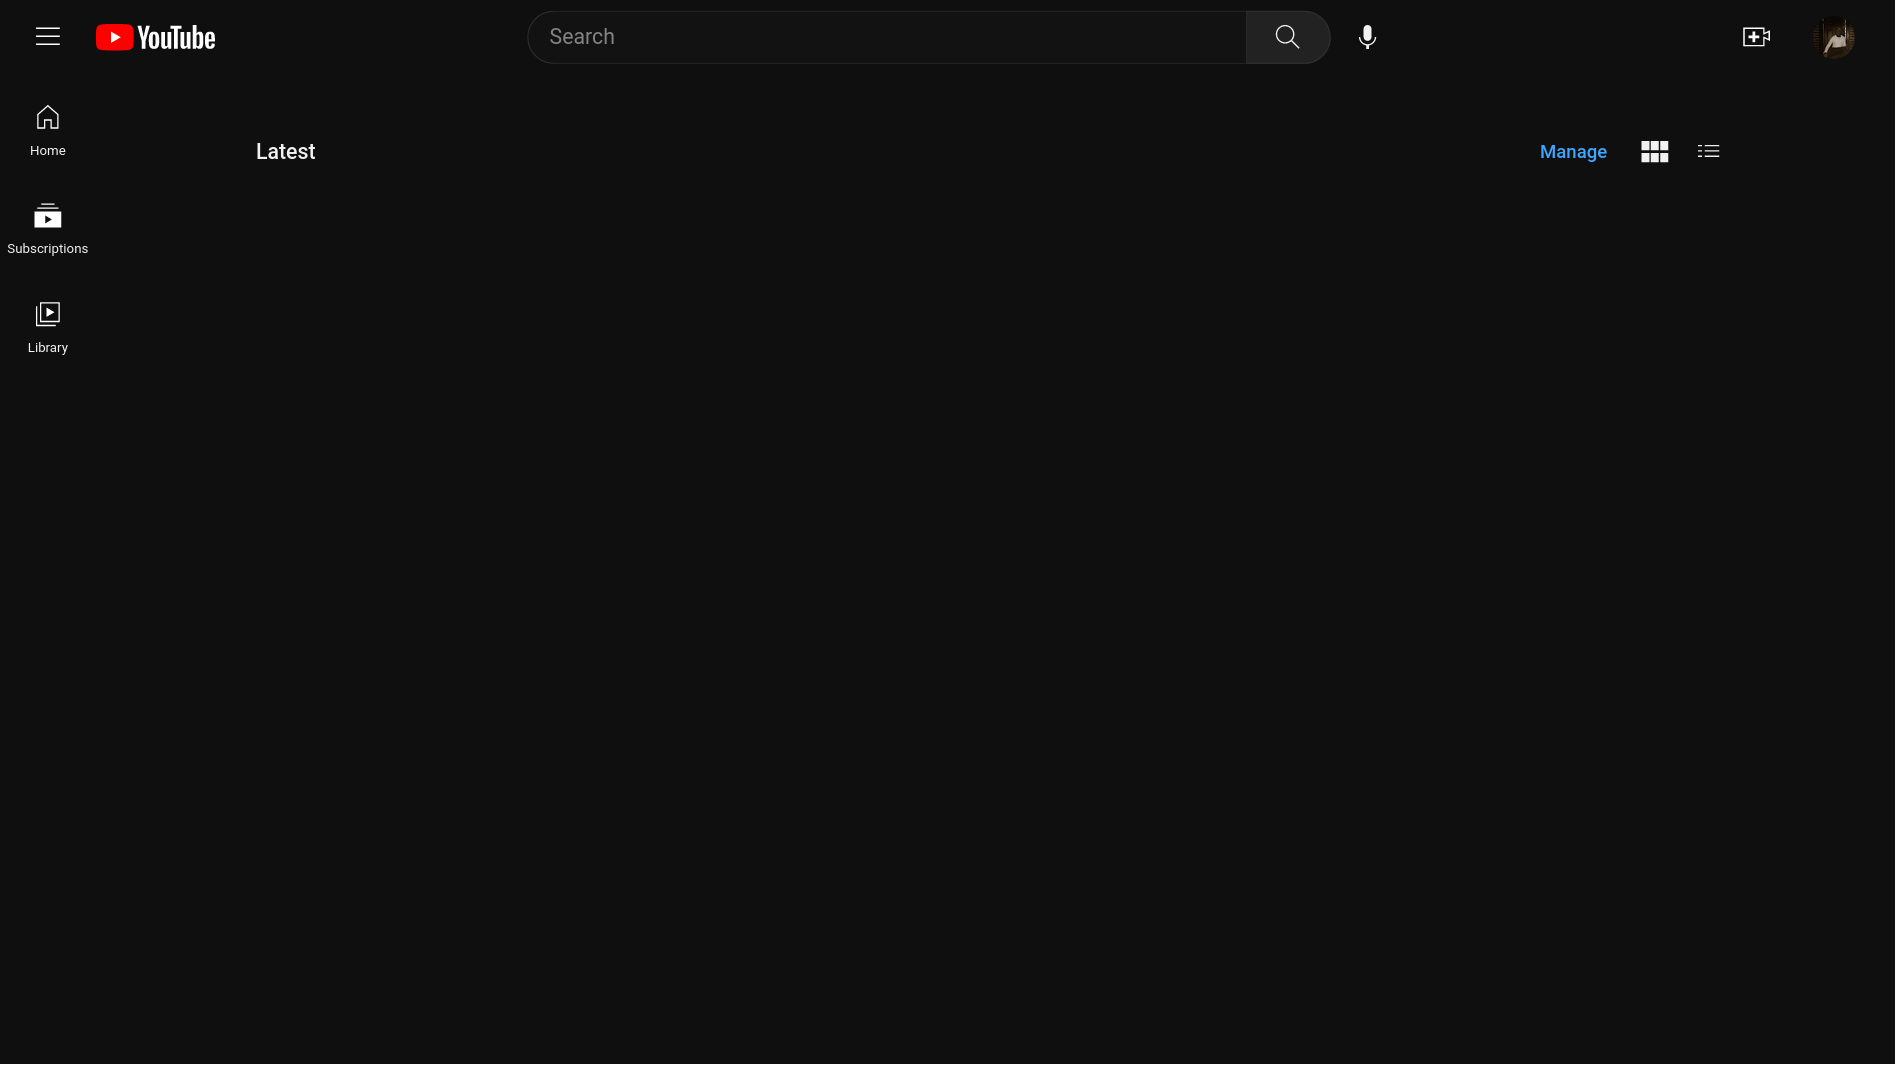 An empty YouTube subscriptions feed. The page is empty except for a "Latest" header and some buttons.